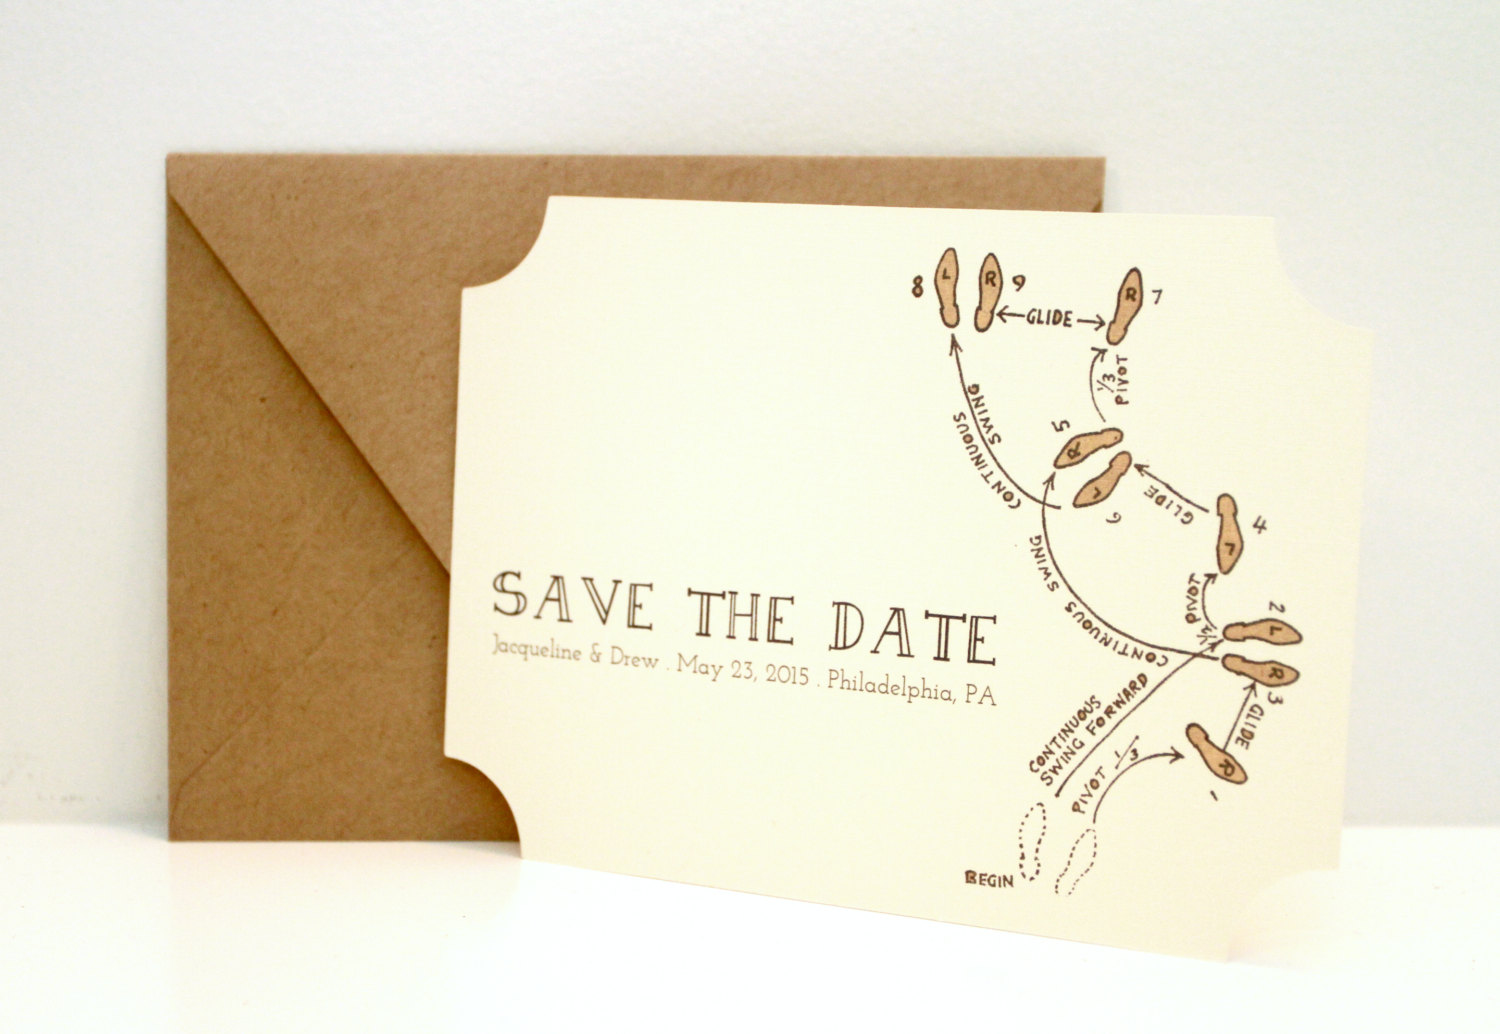 dance steps save the date by golden silhouette